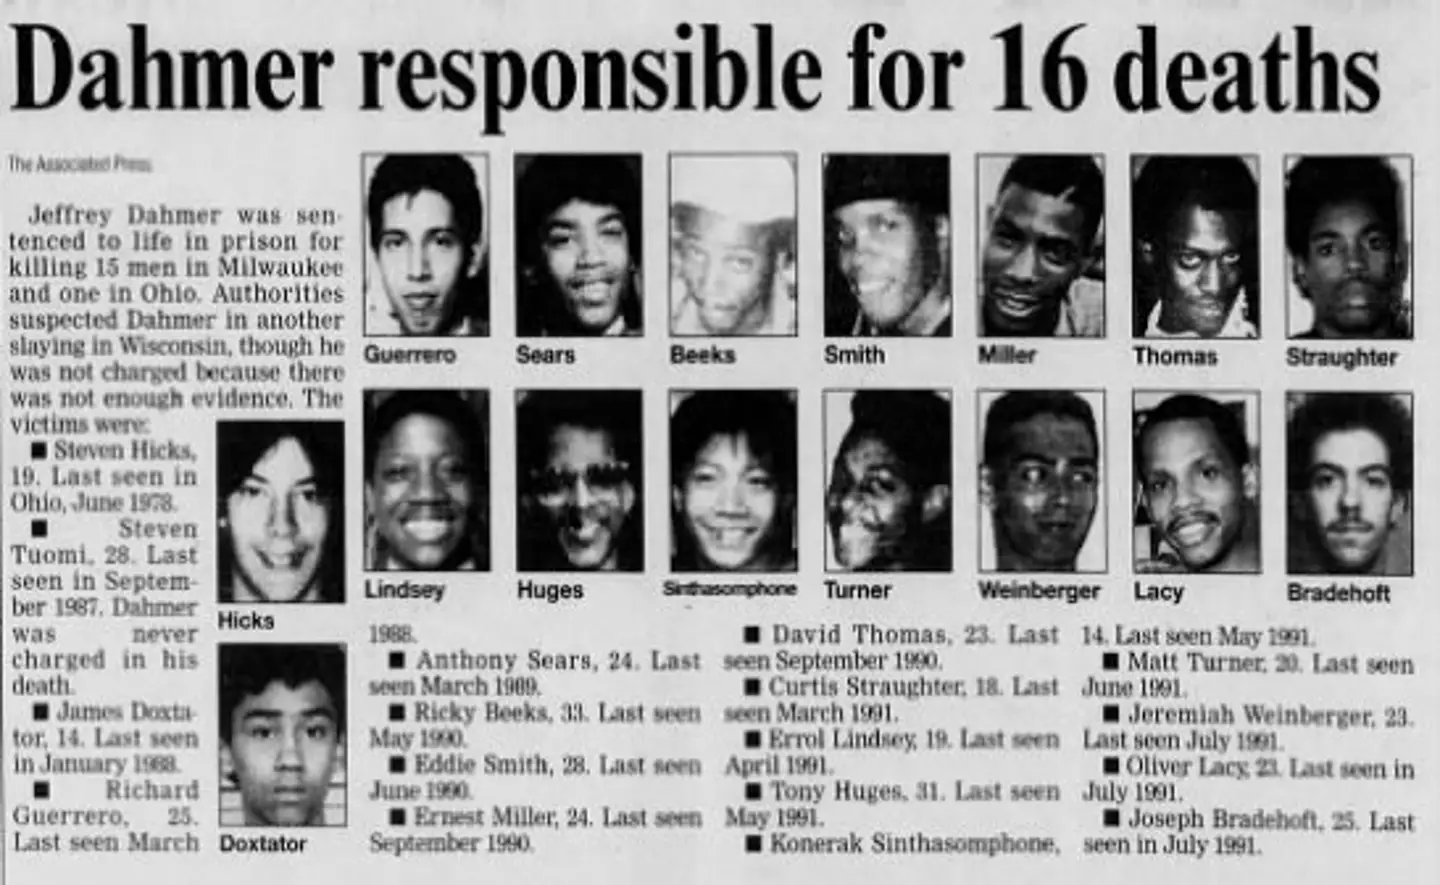 Many of Dahmer's victims were Black men.